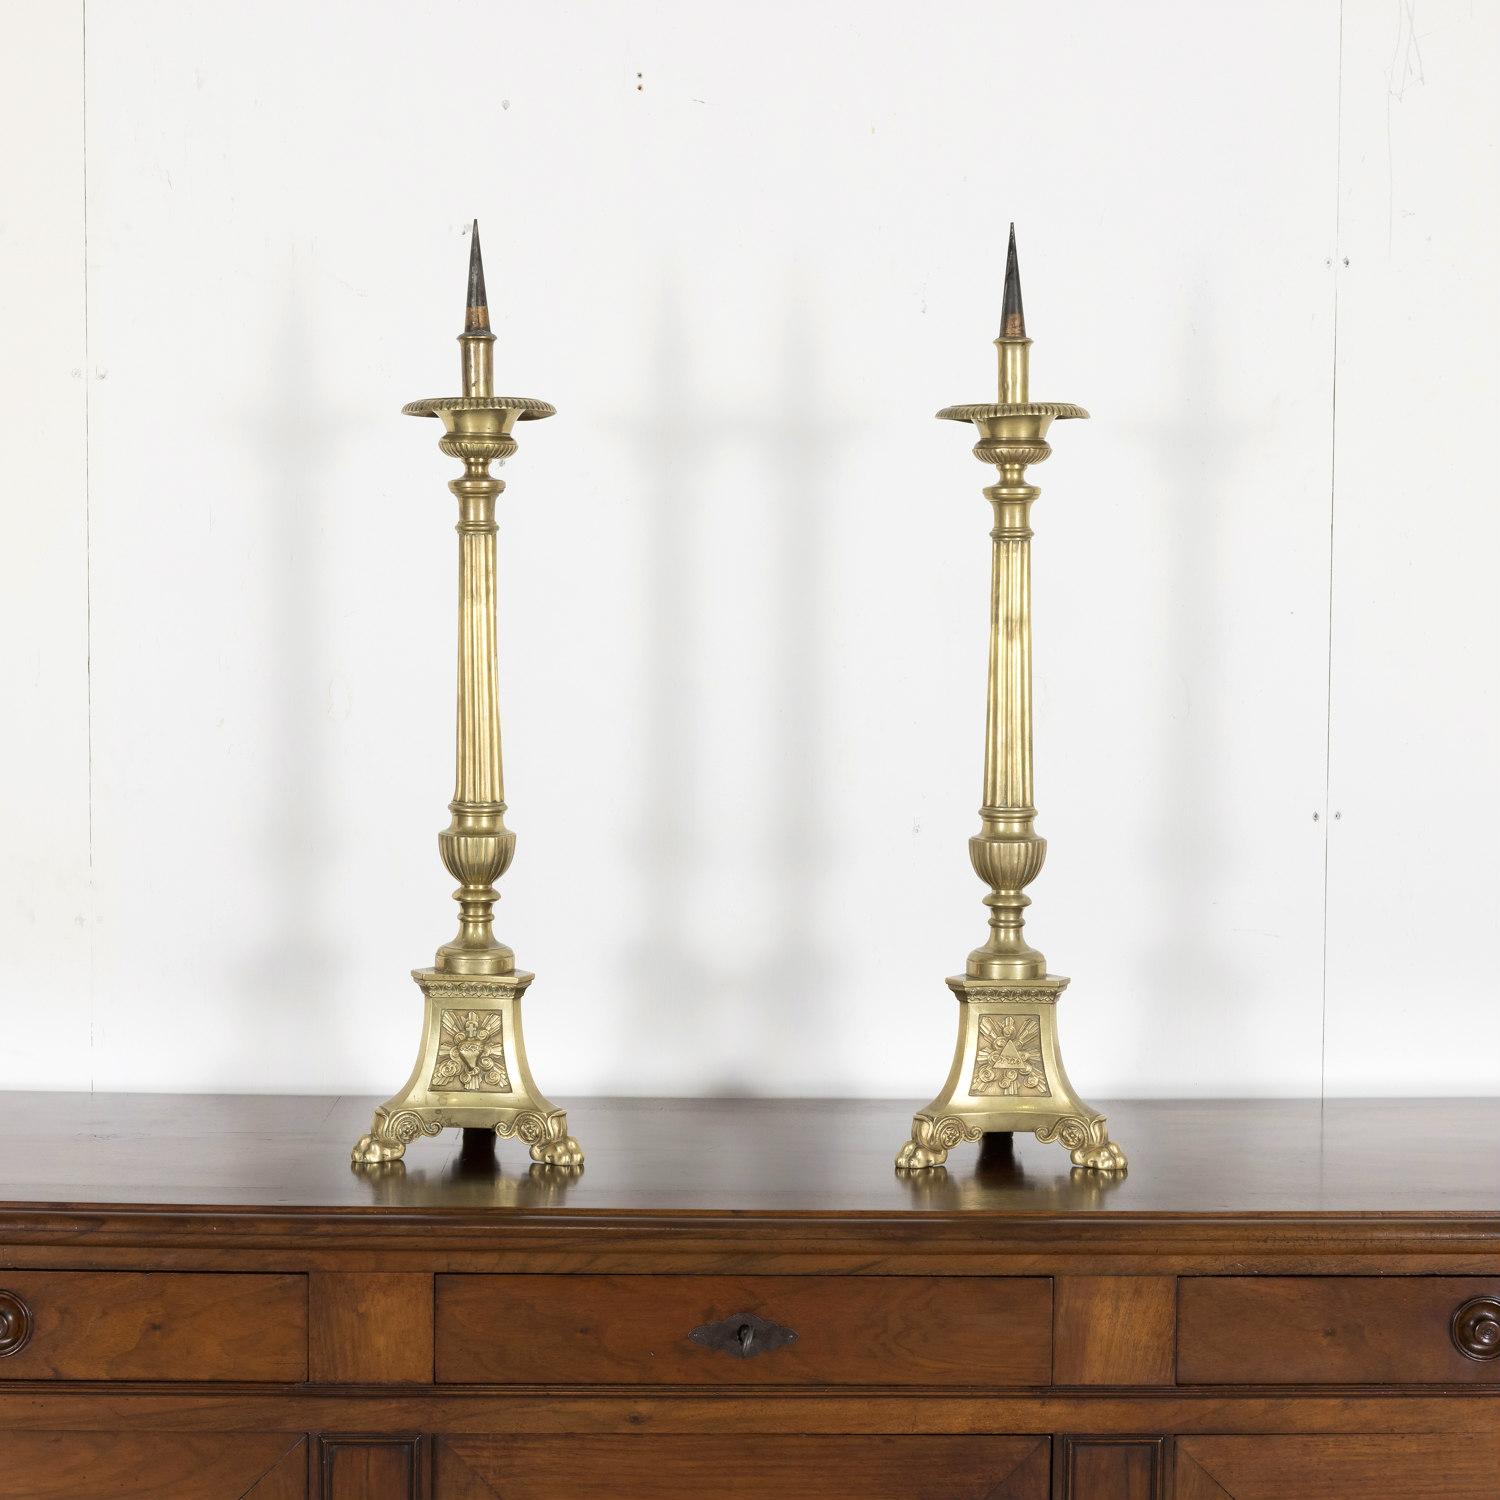 A beautiful pair of 19th century French solid brass cathedral altar prickets or candlesticks from the South of France near Montpellier, circa 1880s. Each is raised on three claw feet having shaped triangular bases with the Virgin Mary, the Sacred